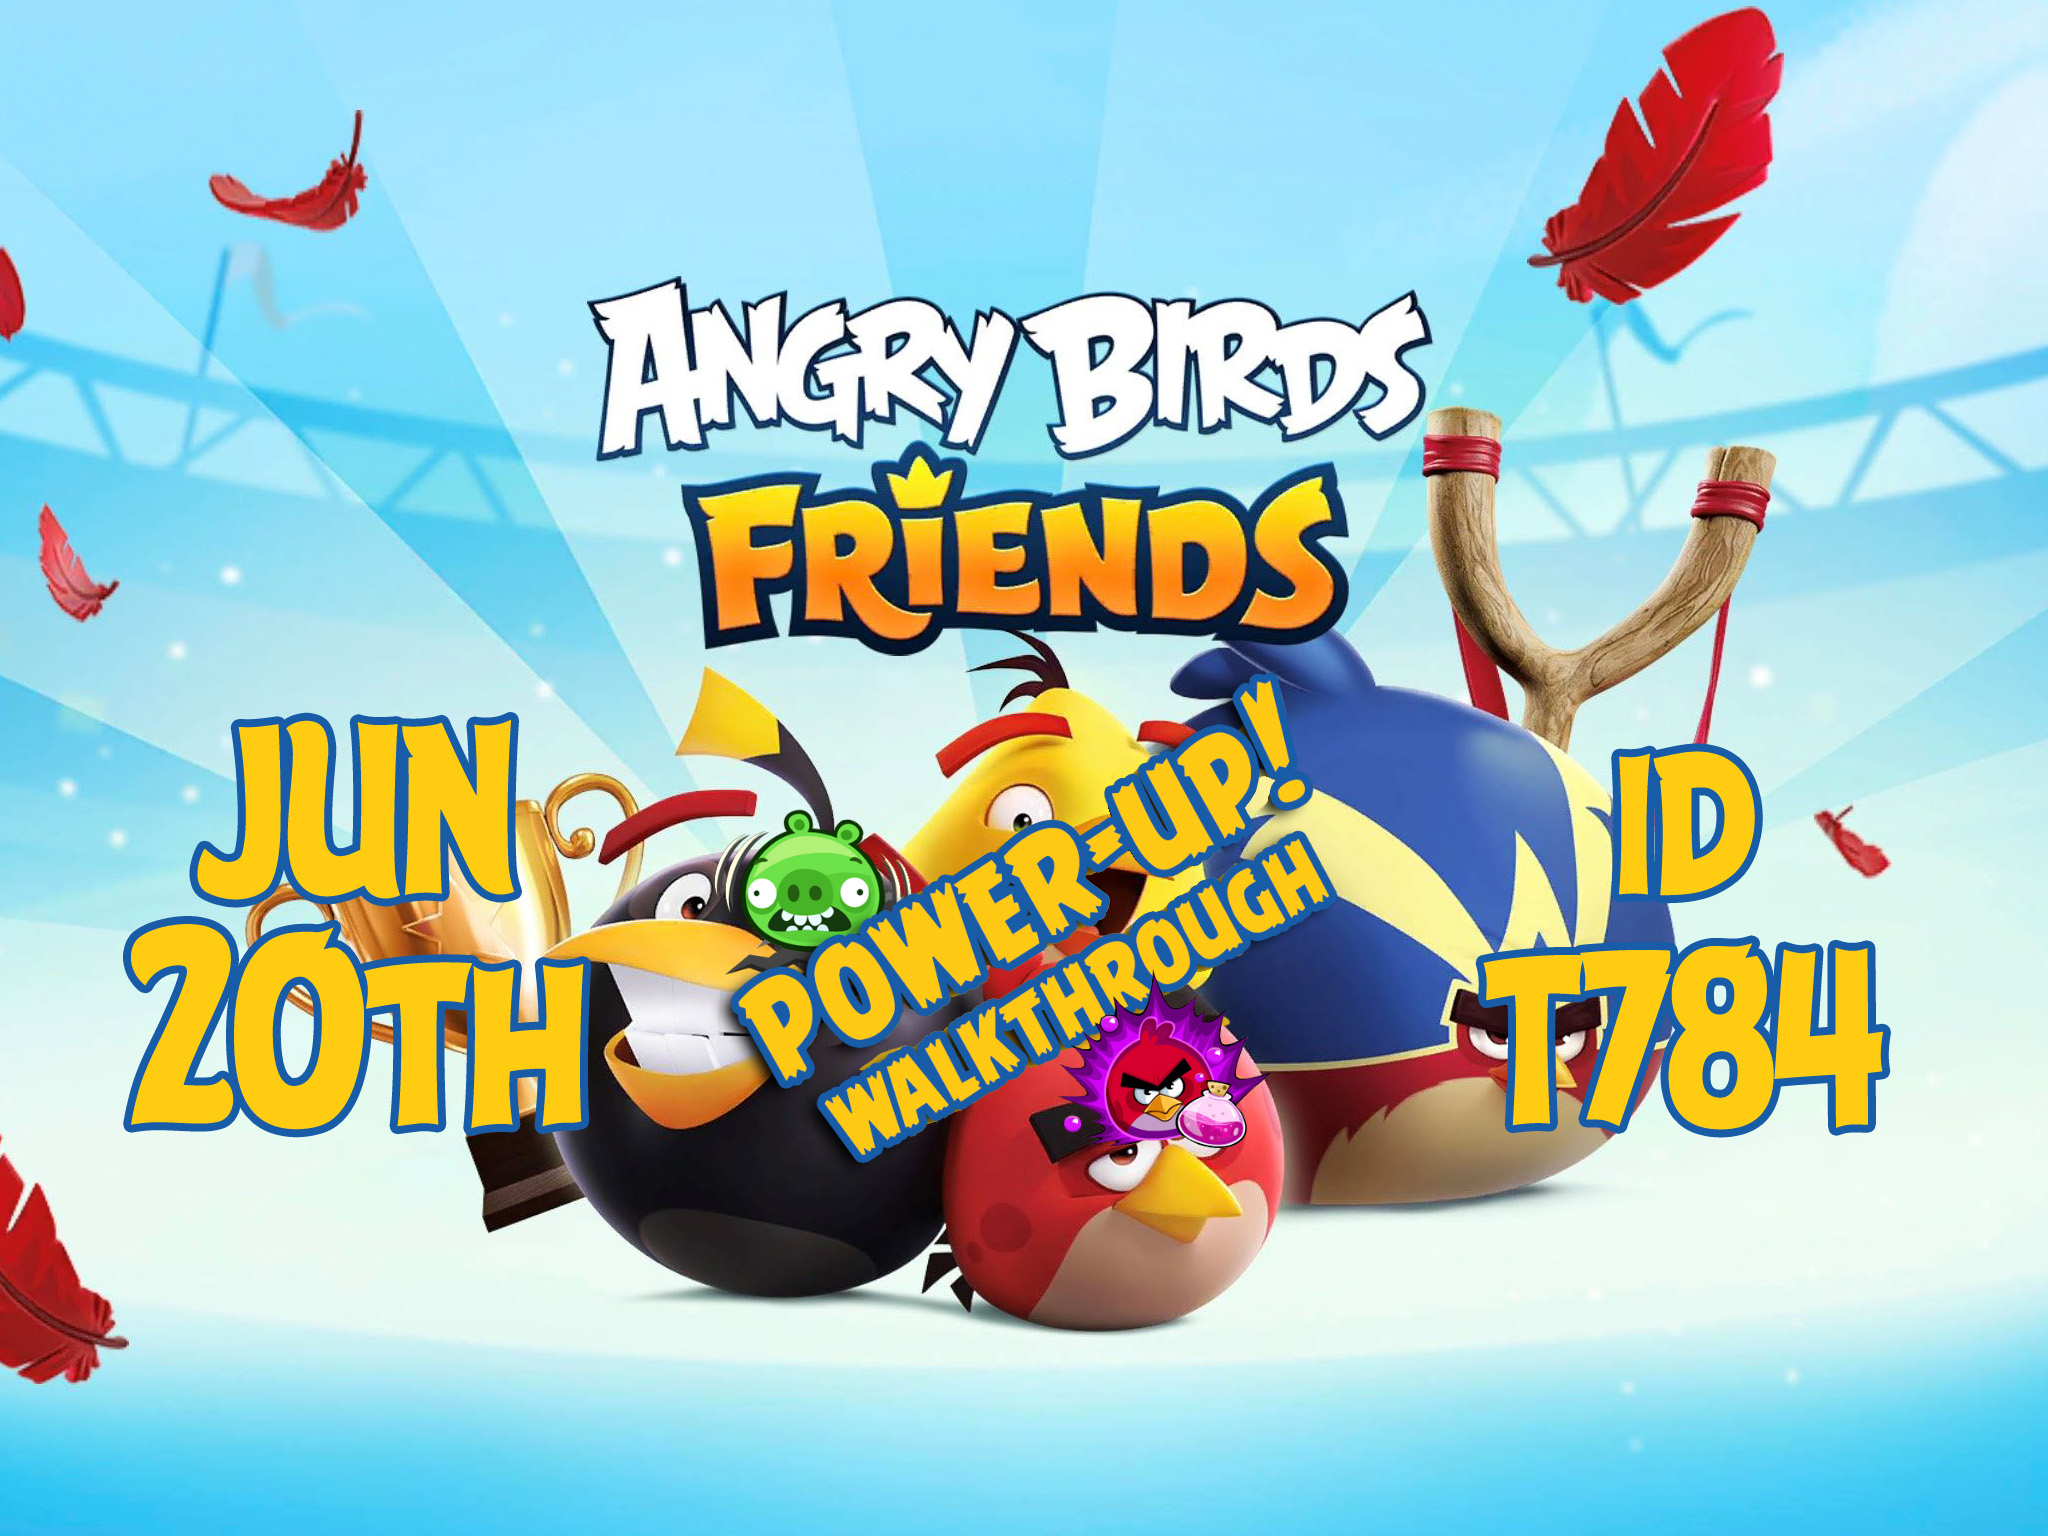 Angry-Birds-Friends-Tournament-T784-Feature-Image-PU